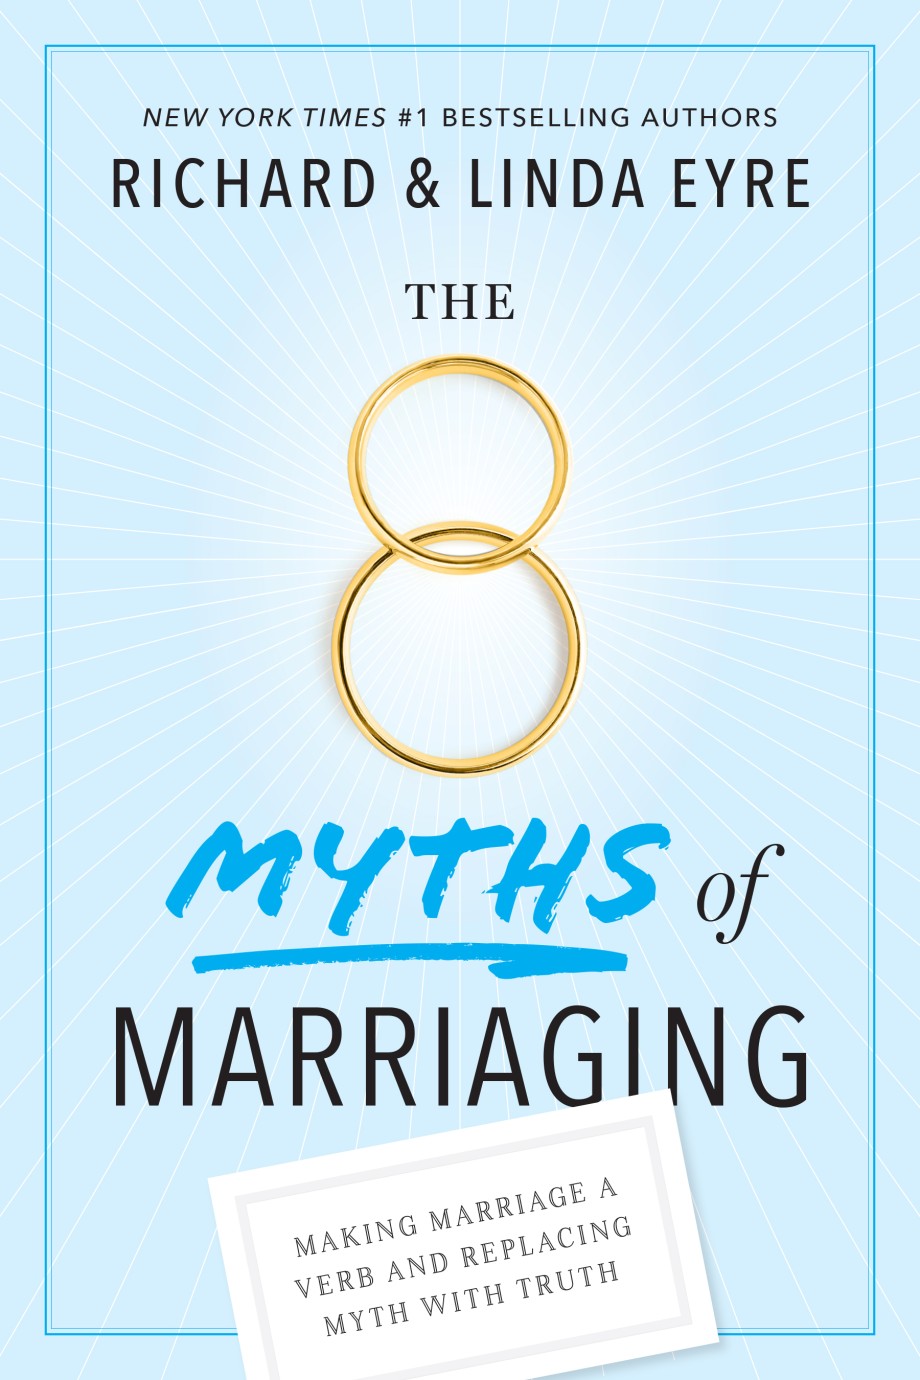 8 Myths of Marriaging Making Marriage a Verb and Replacing Myth with Truth